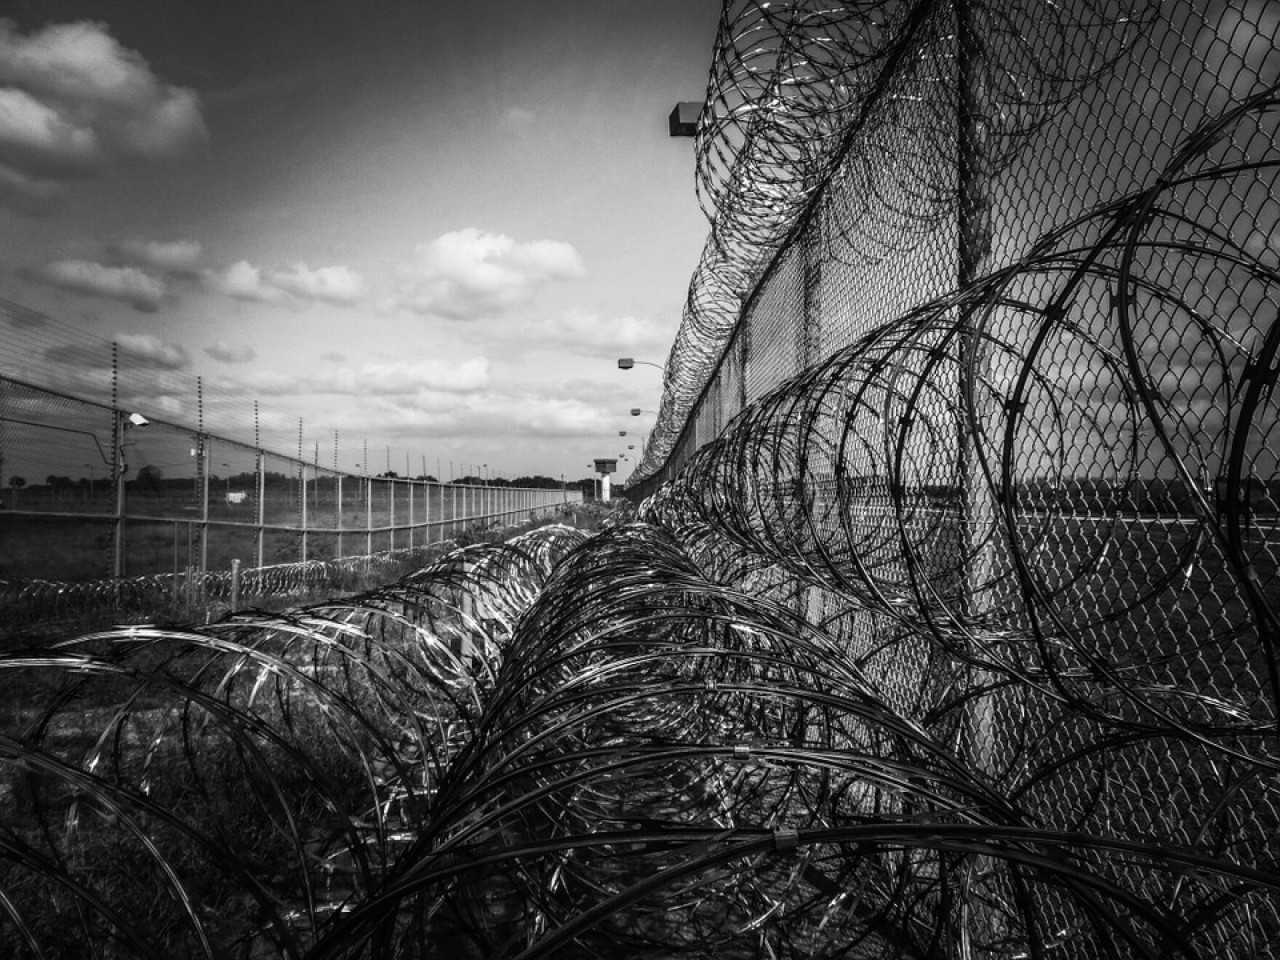 a photo of a prison fence with a roll of razor wire